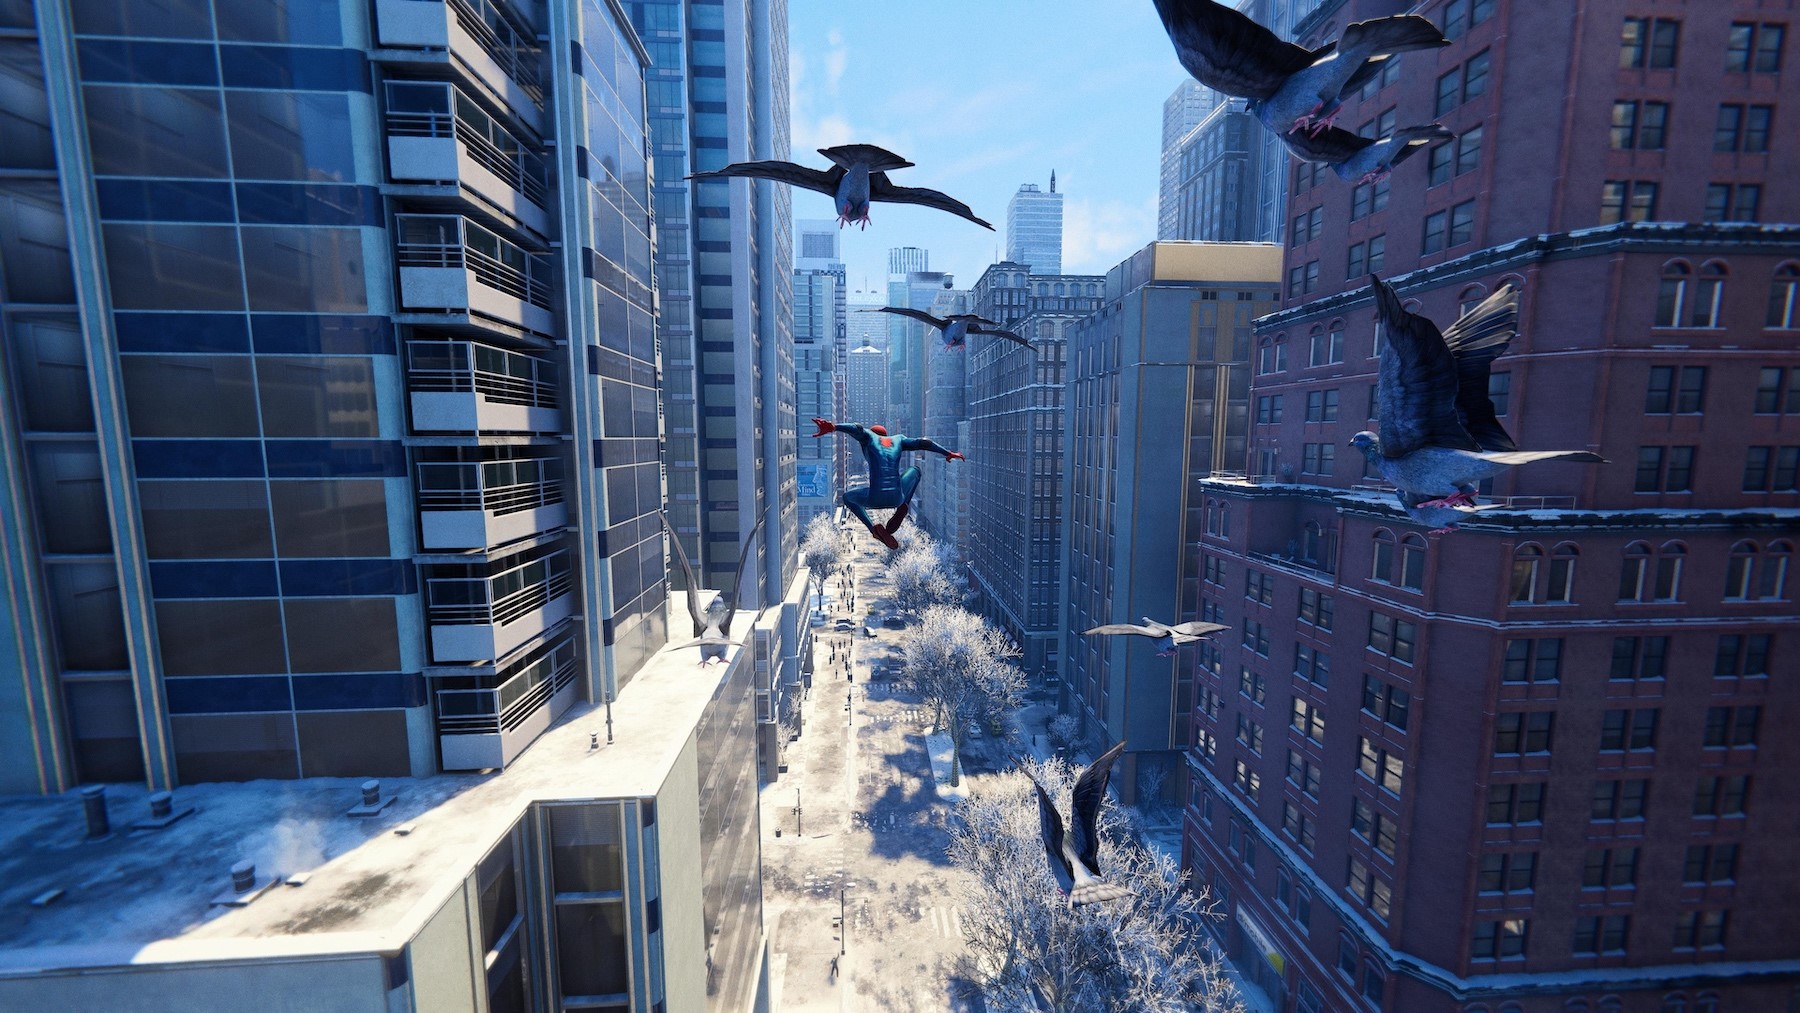 Spider-Man 2 is following the Sony sequel playbook, and I'm not mad about it | DeviceDaily.com